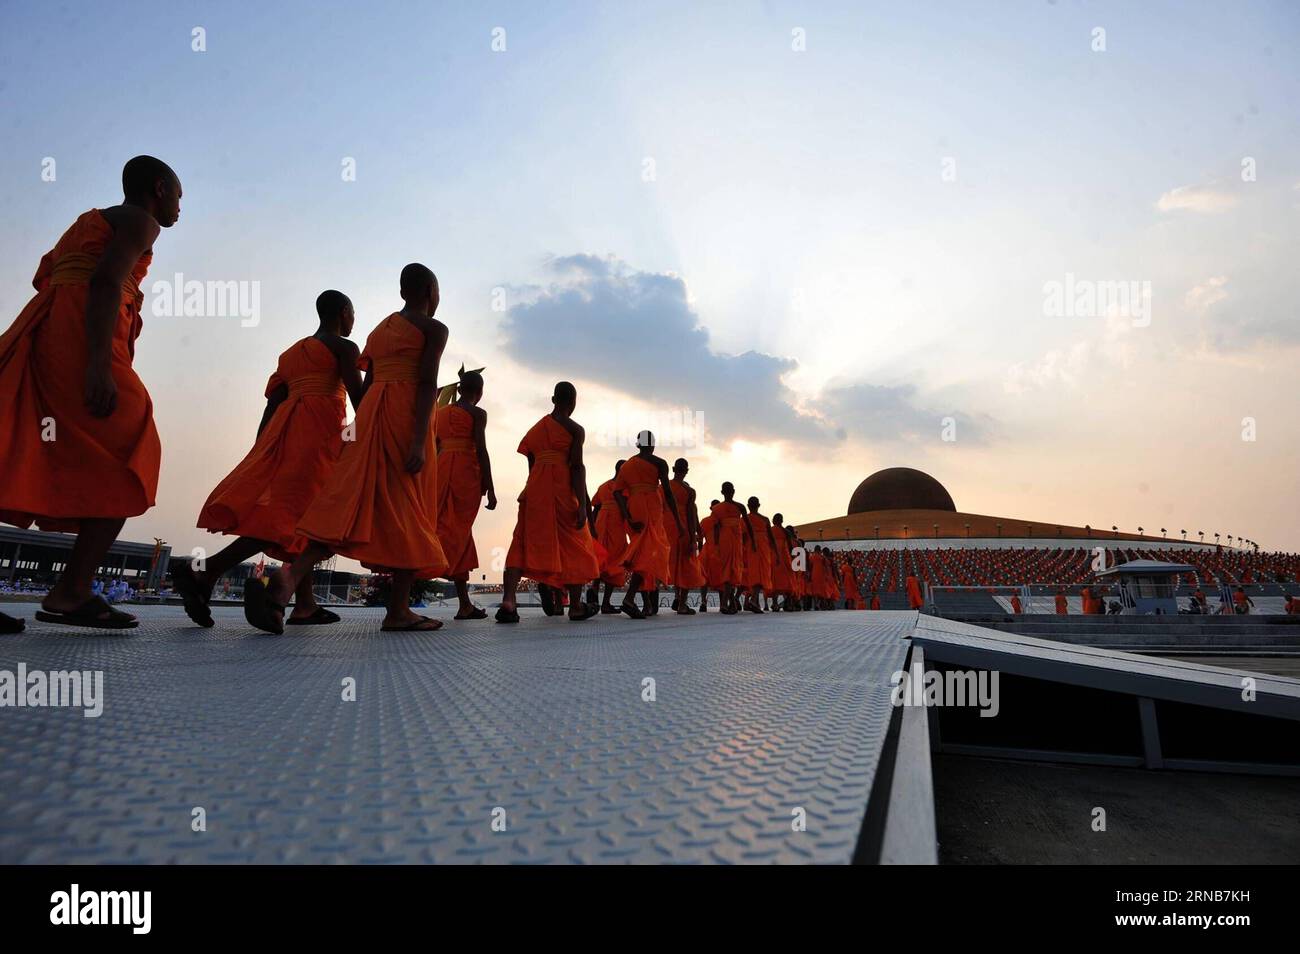 Thai Buddhist monks walk to the pagoda before they participate in Makha Bucha Day ceremonies at Wat Phra Dhammakaya Temple in Pathum Thani Province, Thailand, on Feb. 22, 2016. As one of Thailand s most important Buddhist festivals, Makha Bucha is observed every full moon night of the third month in the Thai lunar calendar. On the Makha Bucha day, people flock to temples and venerate Buddhas as well as pray for blessedness. ) THAILAND-PATHUM THANI-MAKHA BUCHA DAY RachenxSageamsak PUBLICATIONxNOTxINxCHN   Thai Buddhist Monks Walk to The Pagoda Before They participate in Makha Bucha Day Ceremoni Stock Photo